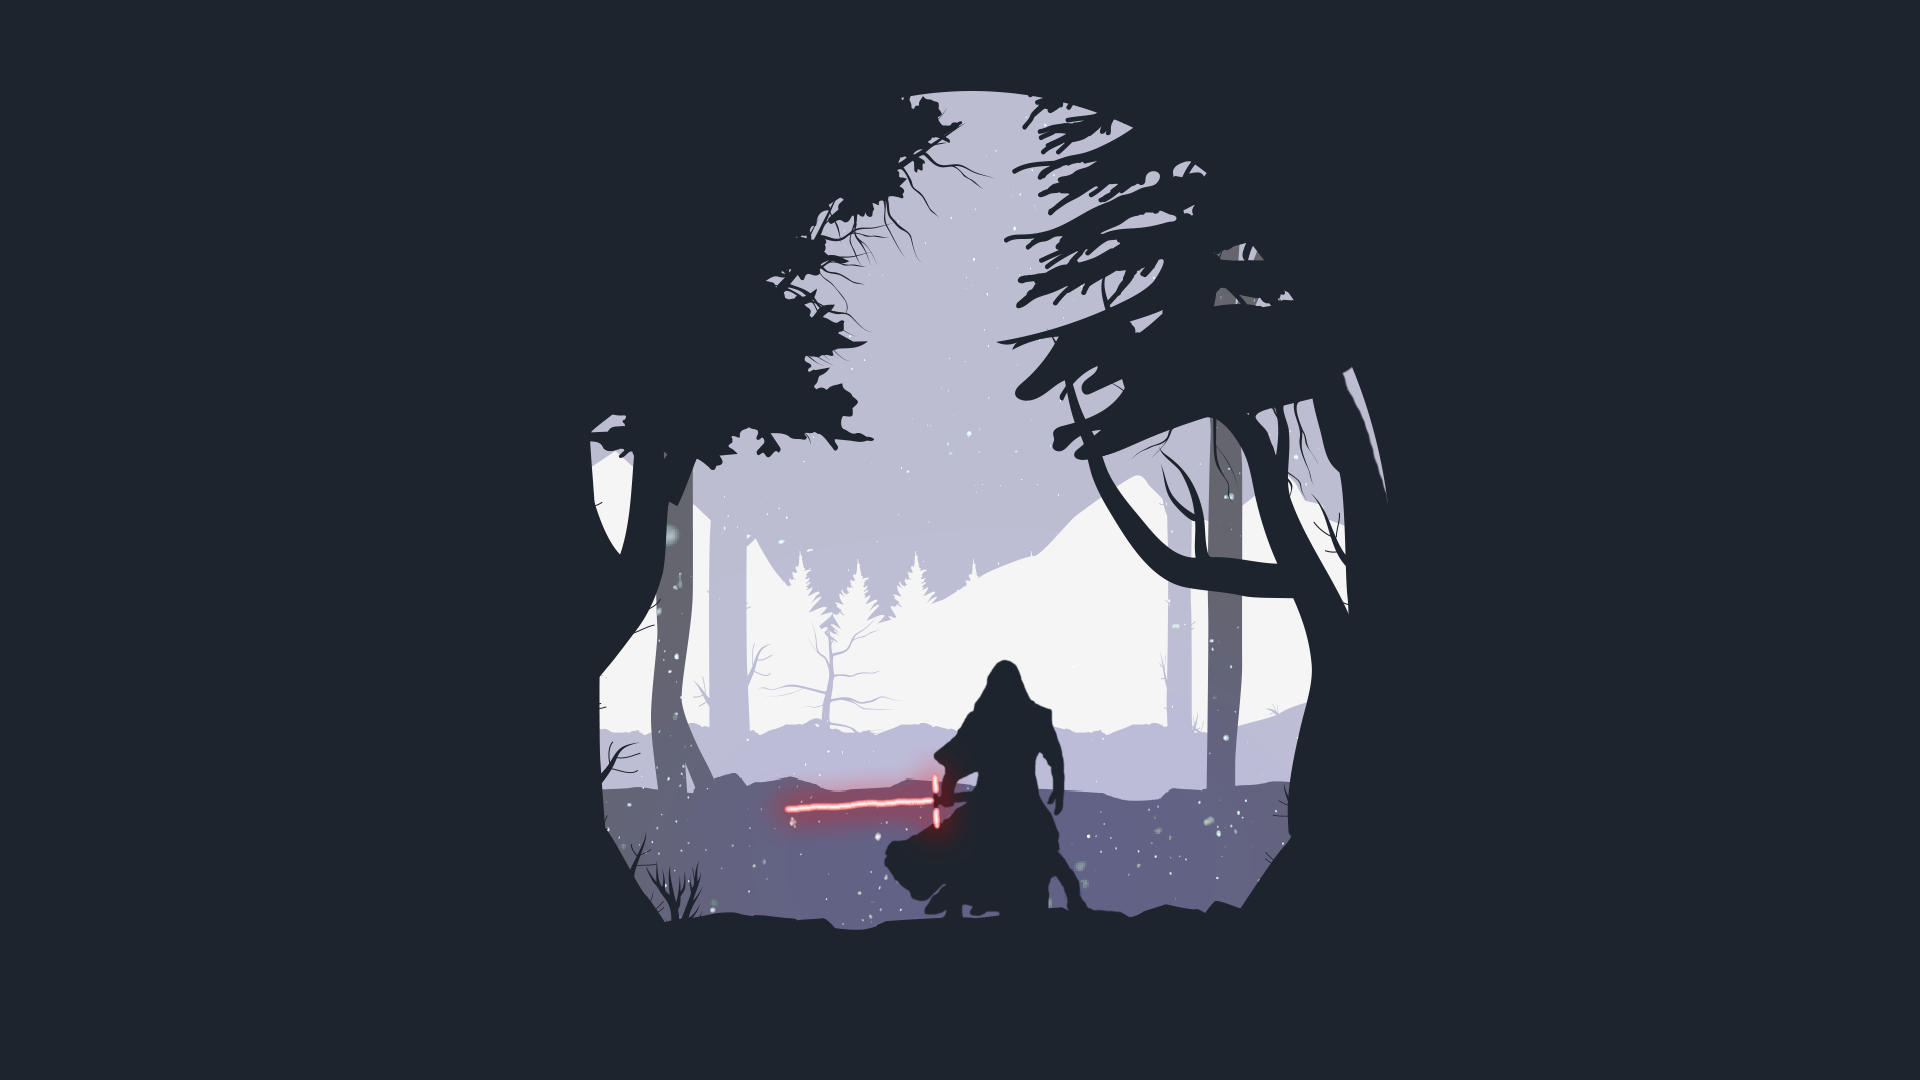 Star Wars Wallpapers Archives - Page 5 of 46 - WideWallpaper.info ...